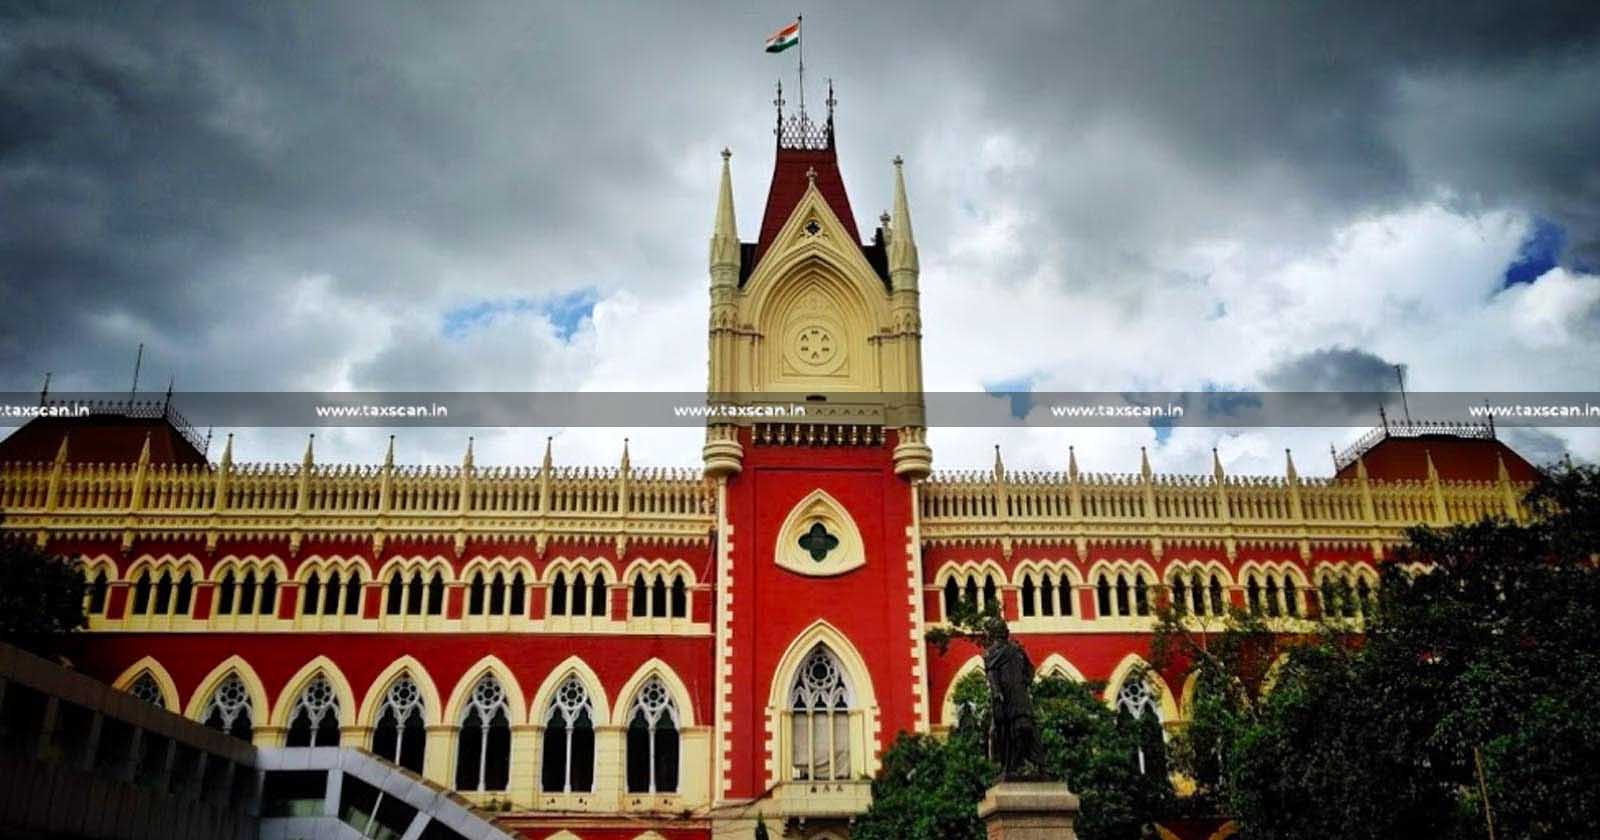 Non-Participation in Income Tax Proceedings - Income Tax Proceedings - Calcutta High Court Dismisses Assessment Order - Pendency of Writ Petition - Assessment Order - taxscan